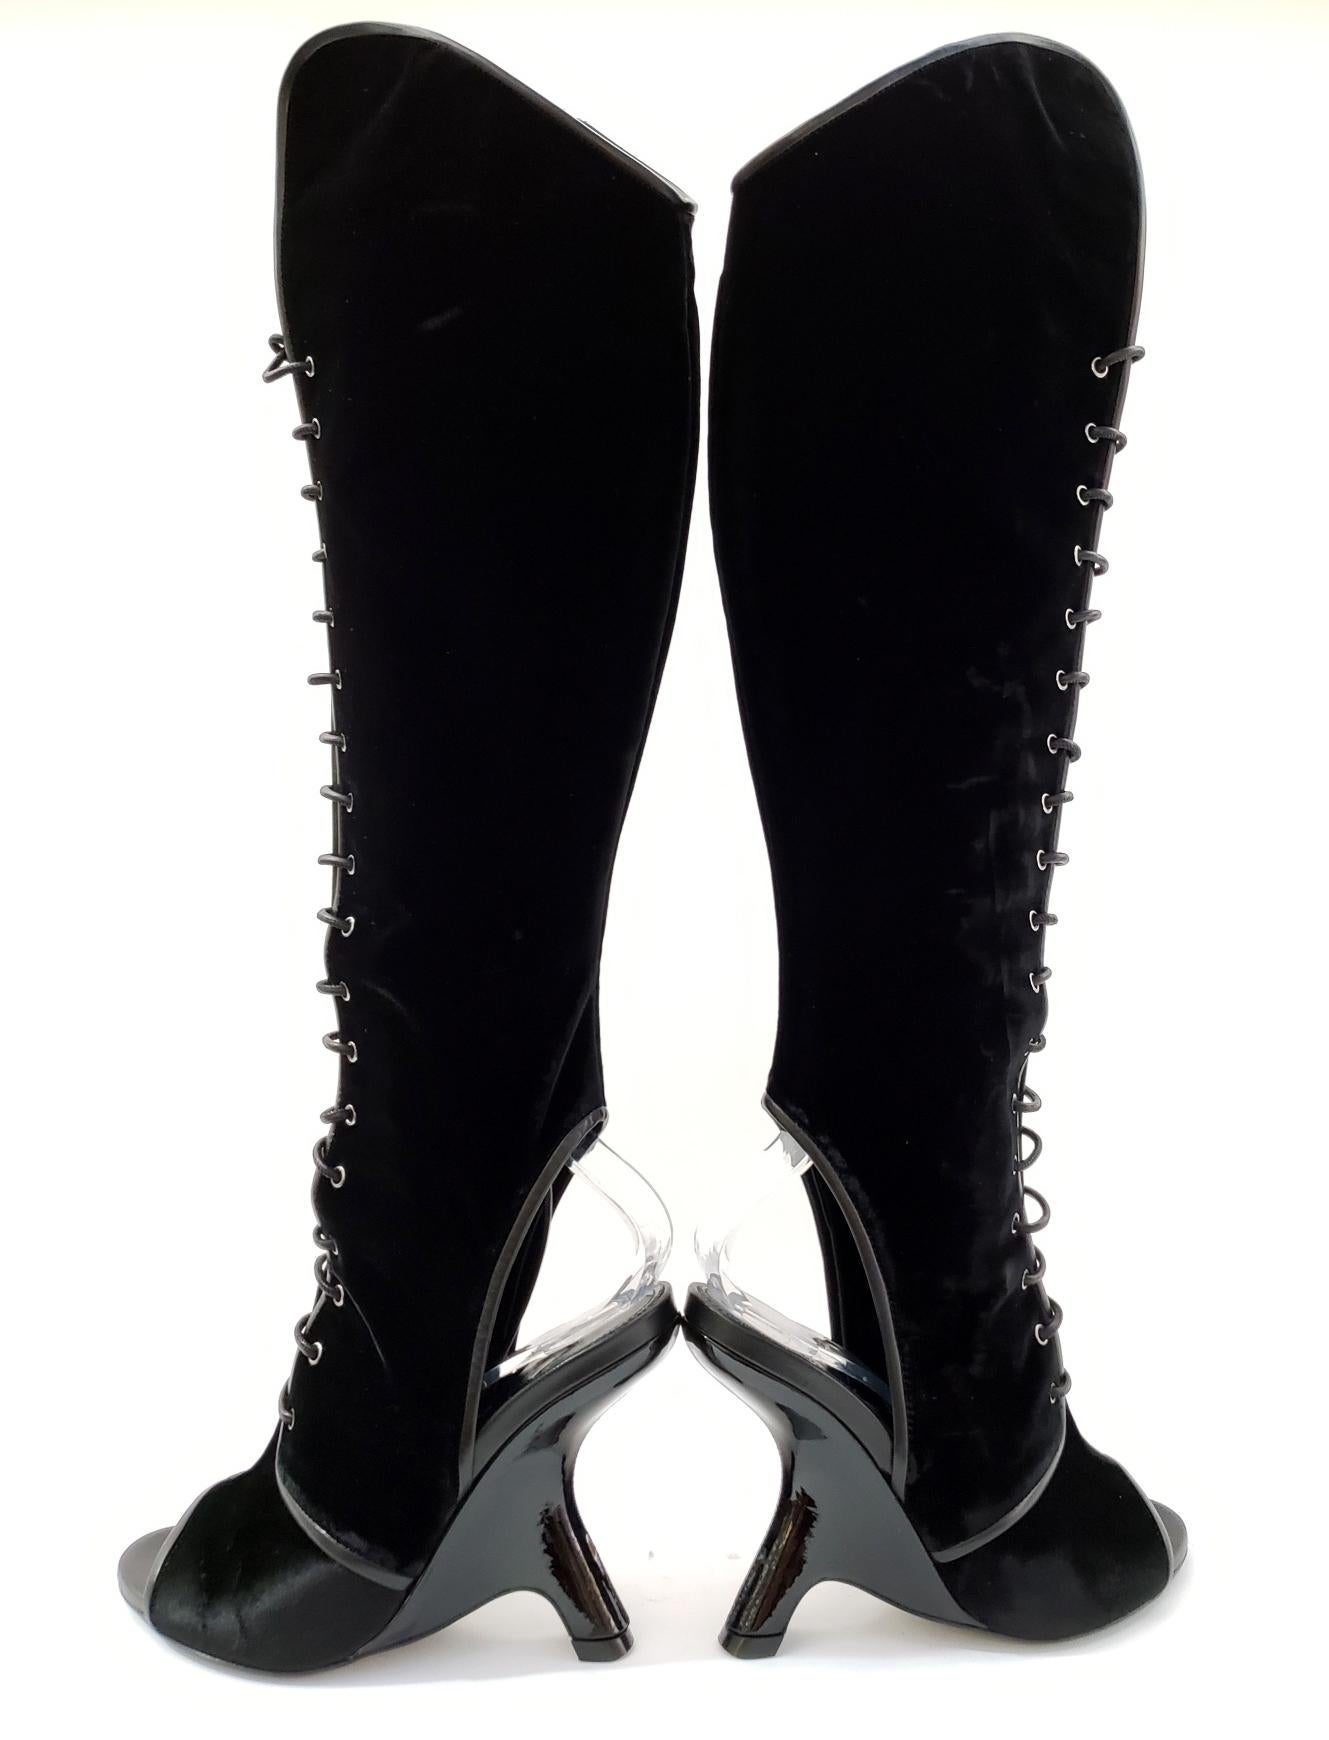 tom ford lace up boots